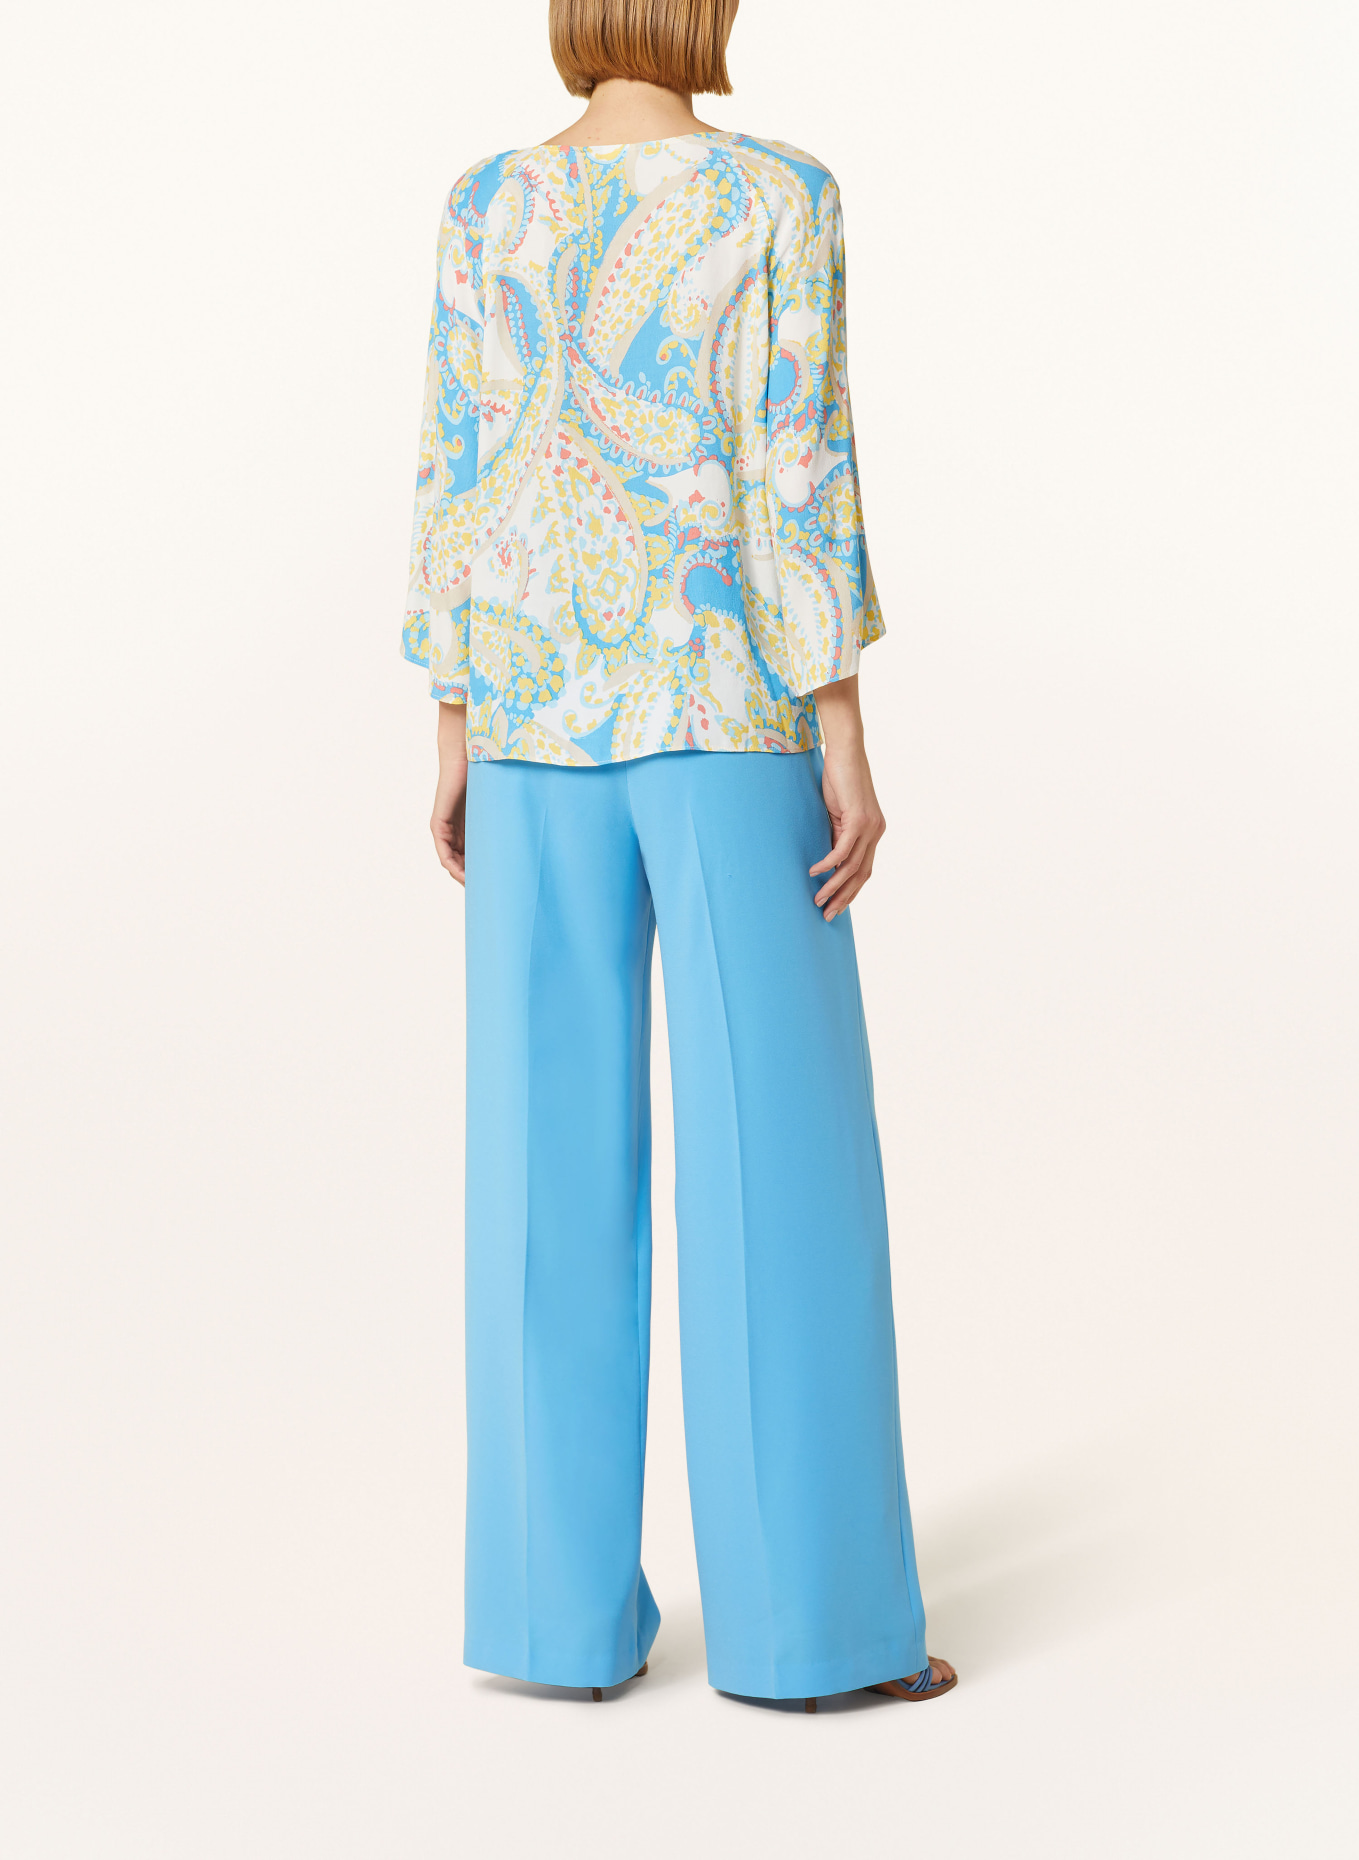 s.Oliver BLACK LABEL Shirt blouse with 3/4 sleeves, Color: LIGHT BLUE/ BEIGE/ YELLOW (Image 3)